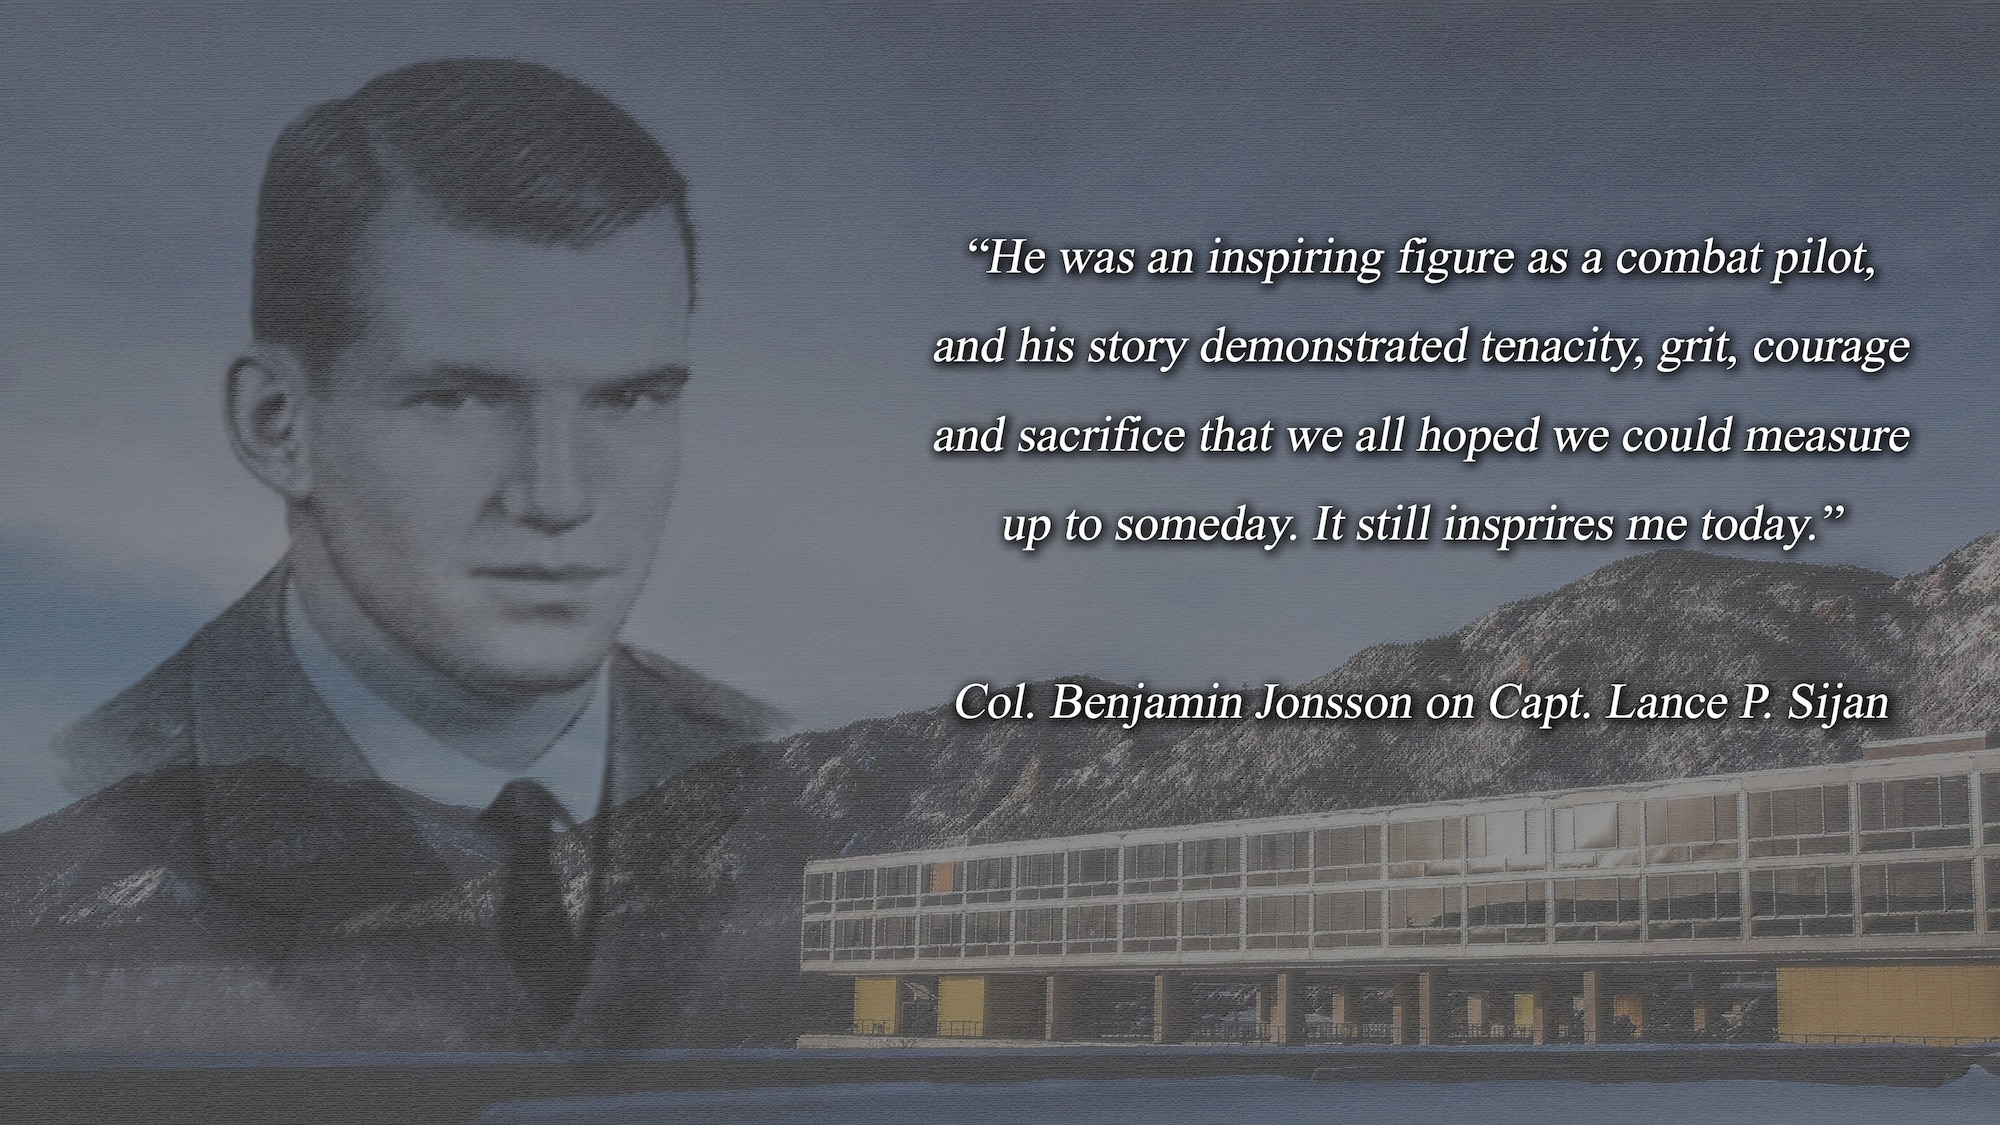 This graphic depicts U.S. Air Force Capt. Lance P. Sijan and the dormitories at the U.S. Air Force Academy named after him, Sijan Hall.